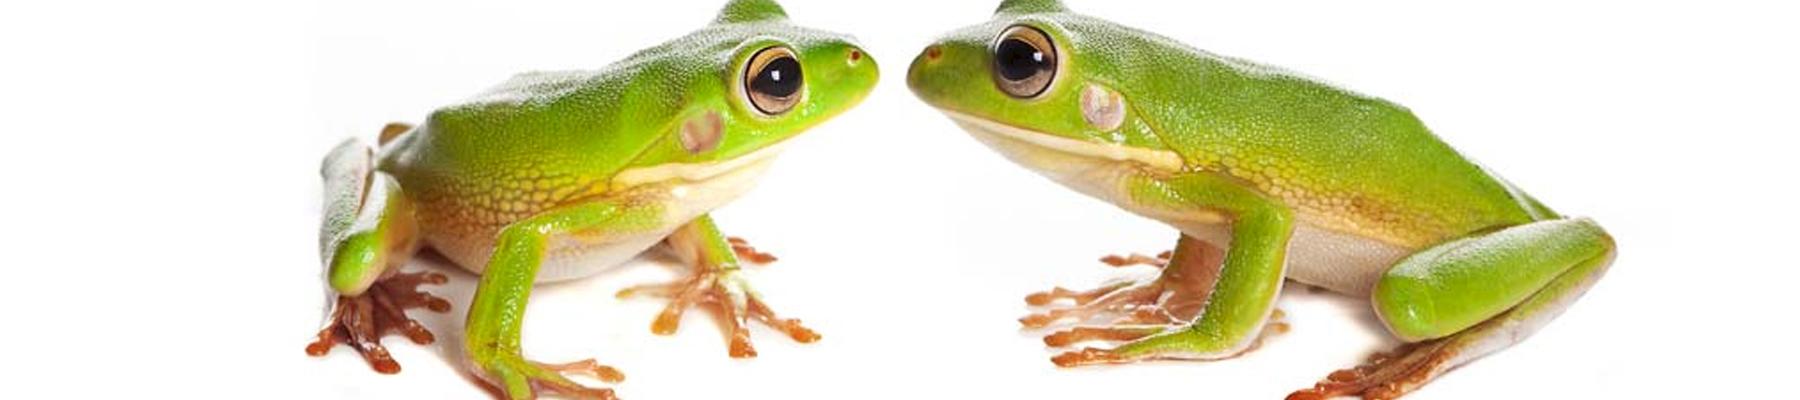 White-lipped Tree-frogs Nyctimystes infrafrenatus: Indonesia's Captive Breeding Production Plan sets a quota 67 times higher than the animal's reproductive rate © Photowitch/Dreamstime.com